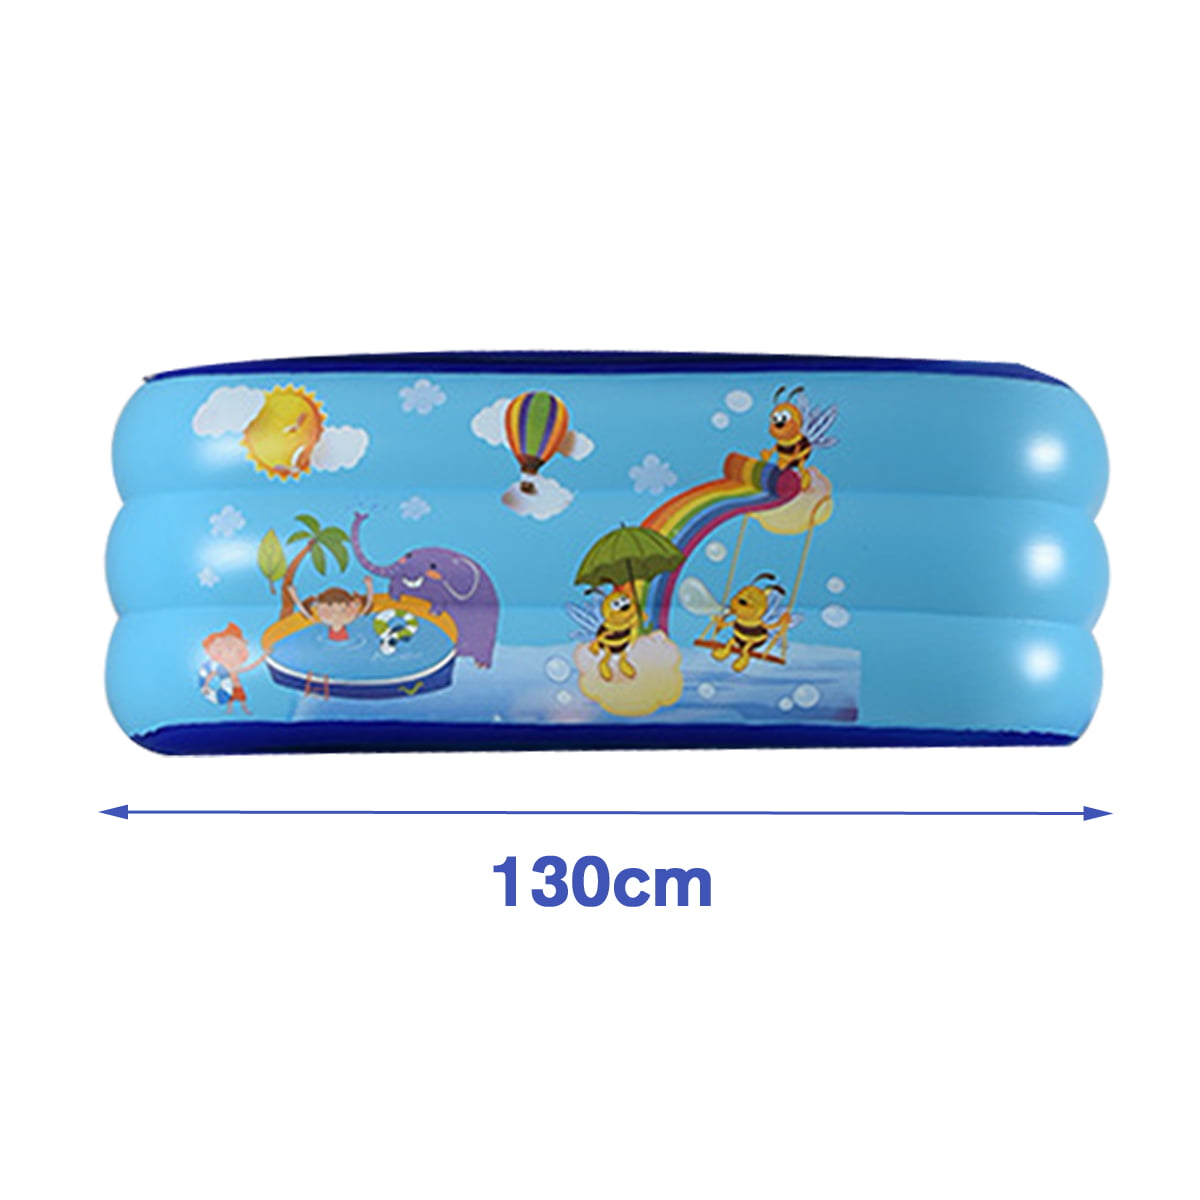 Large Inflatable Family Garden Outdoor Paddling Swimming Pool Fun Summer Relax 